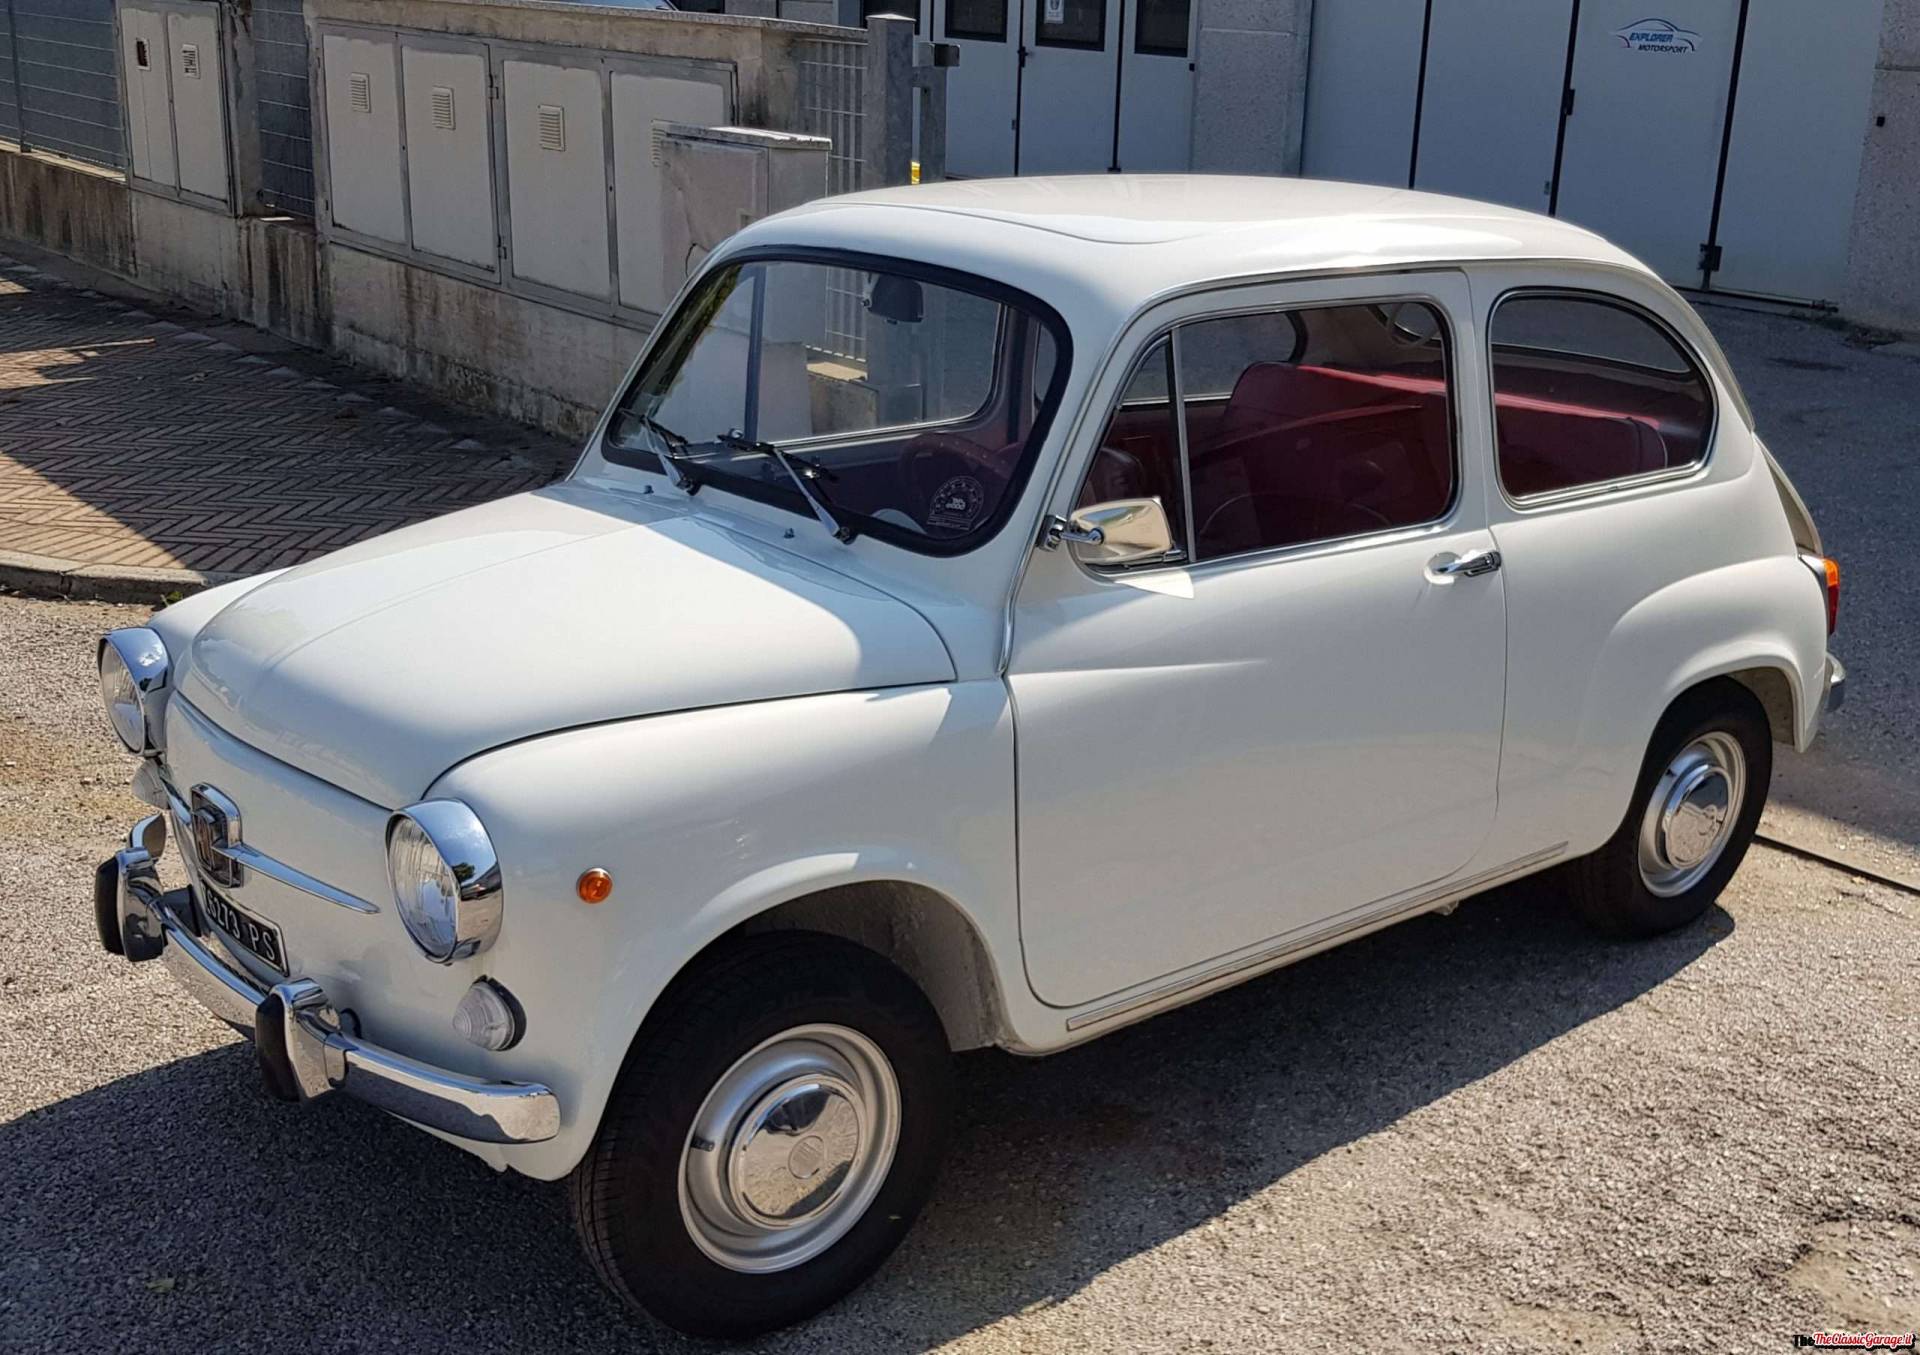 For Sale: FIAT 600 D (1968) offered for €7,900